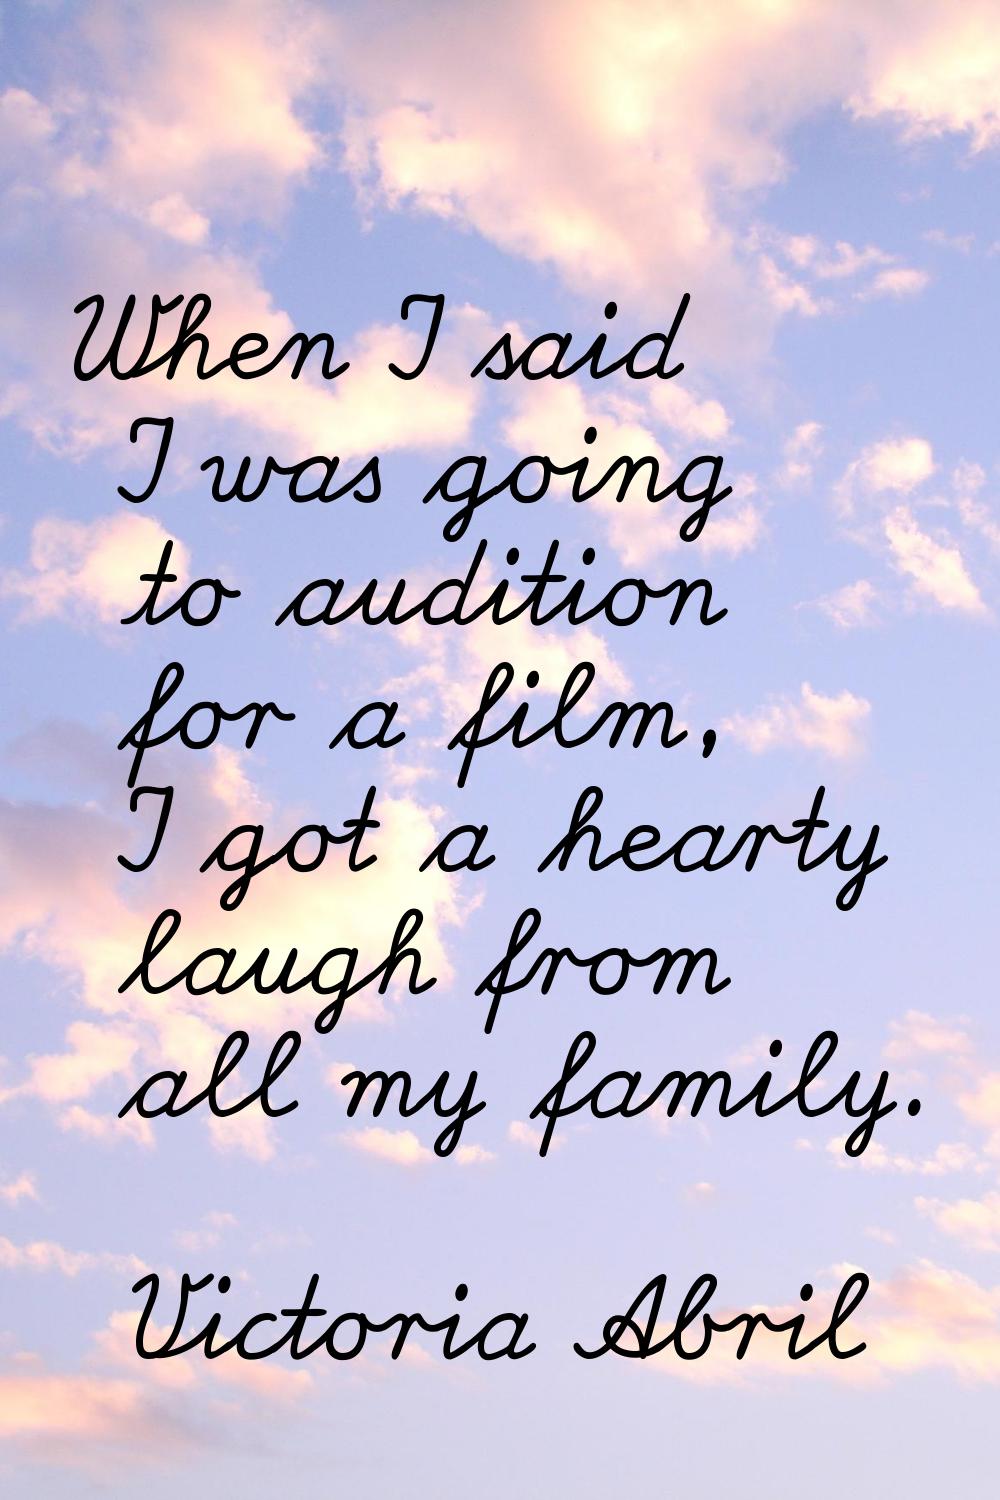 When I said I was going to audition for a film, I got a hearty laugh from all my family.